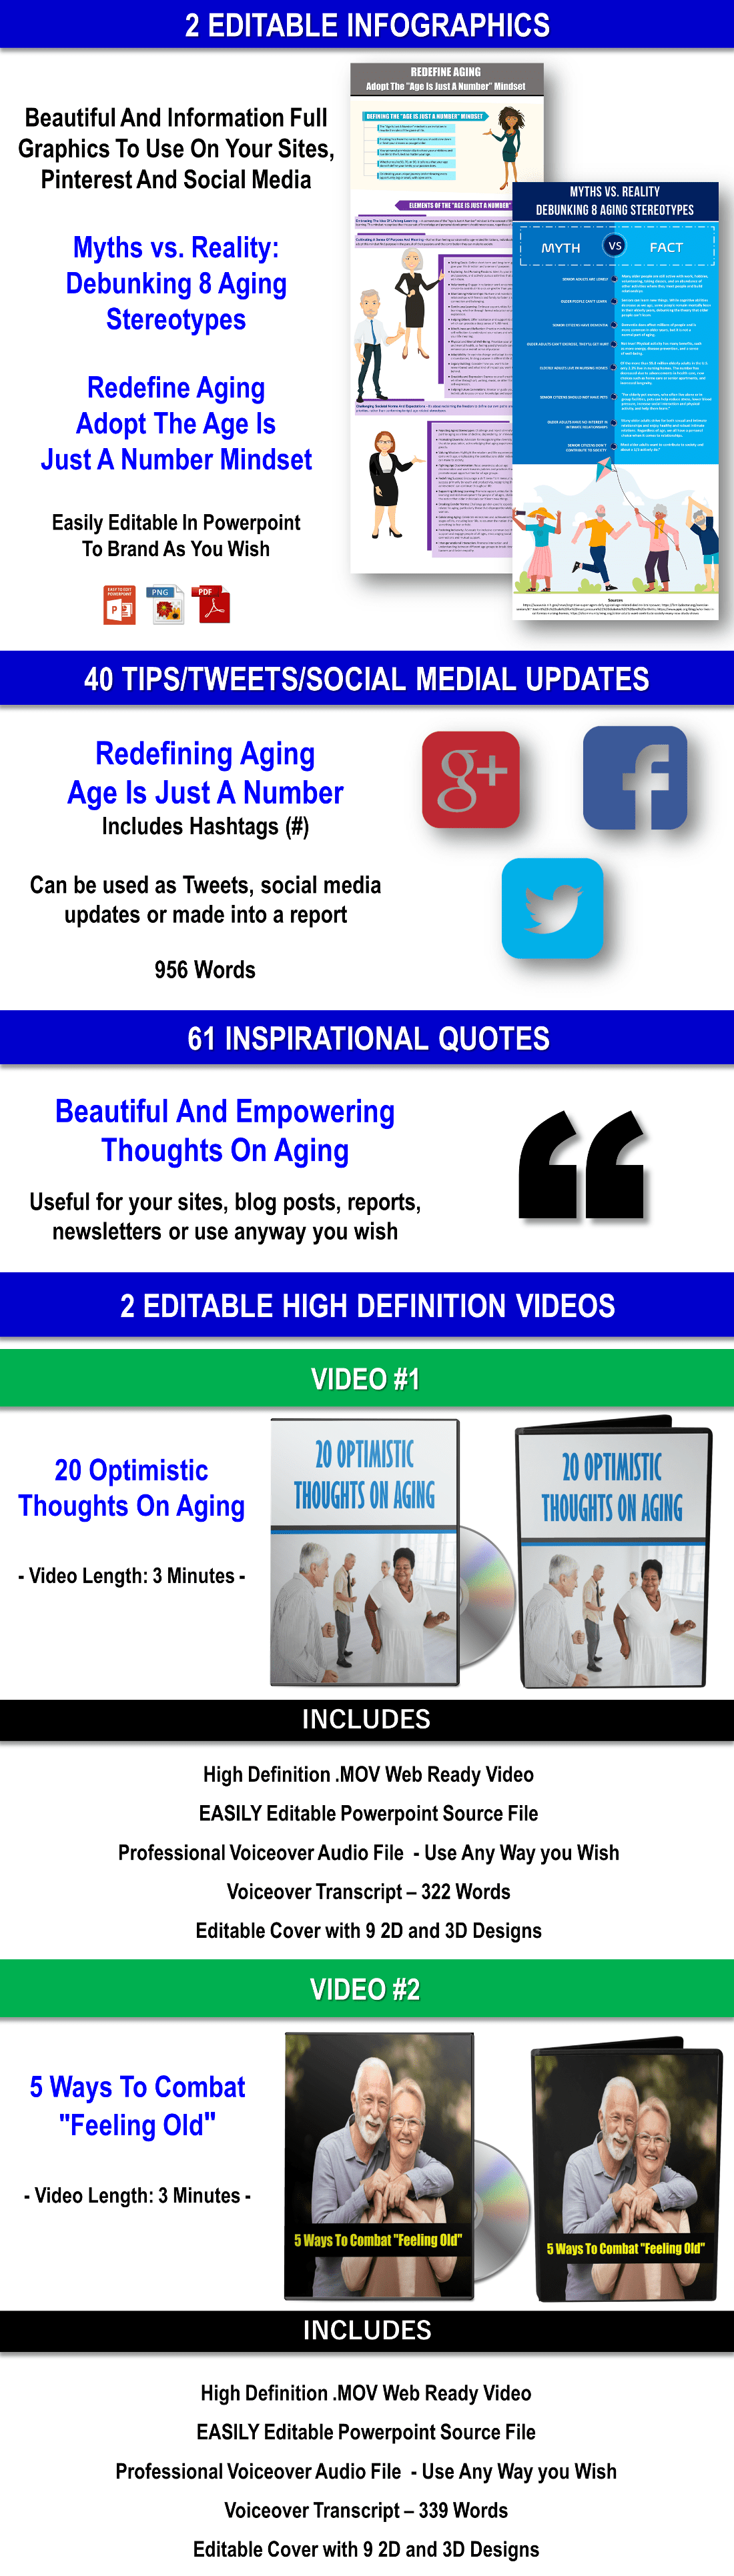 Redefine Aging – Adopt The Age Is Just A Number Mindset Giant Content Pack with PLR Rights